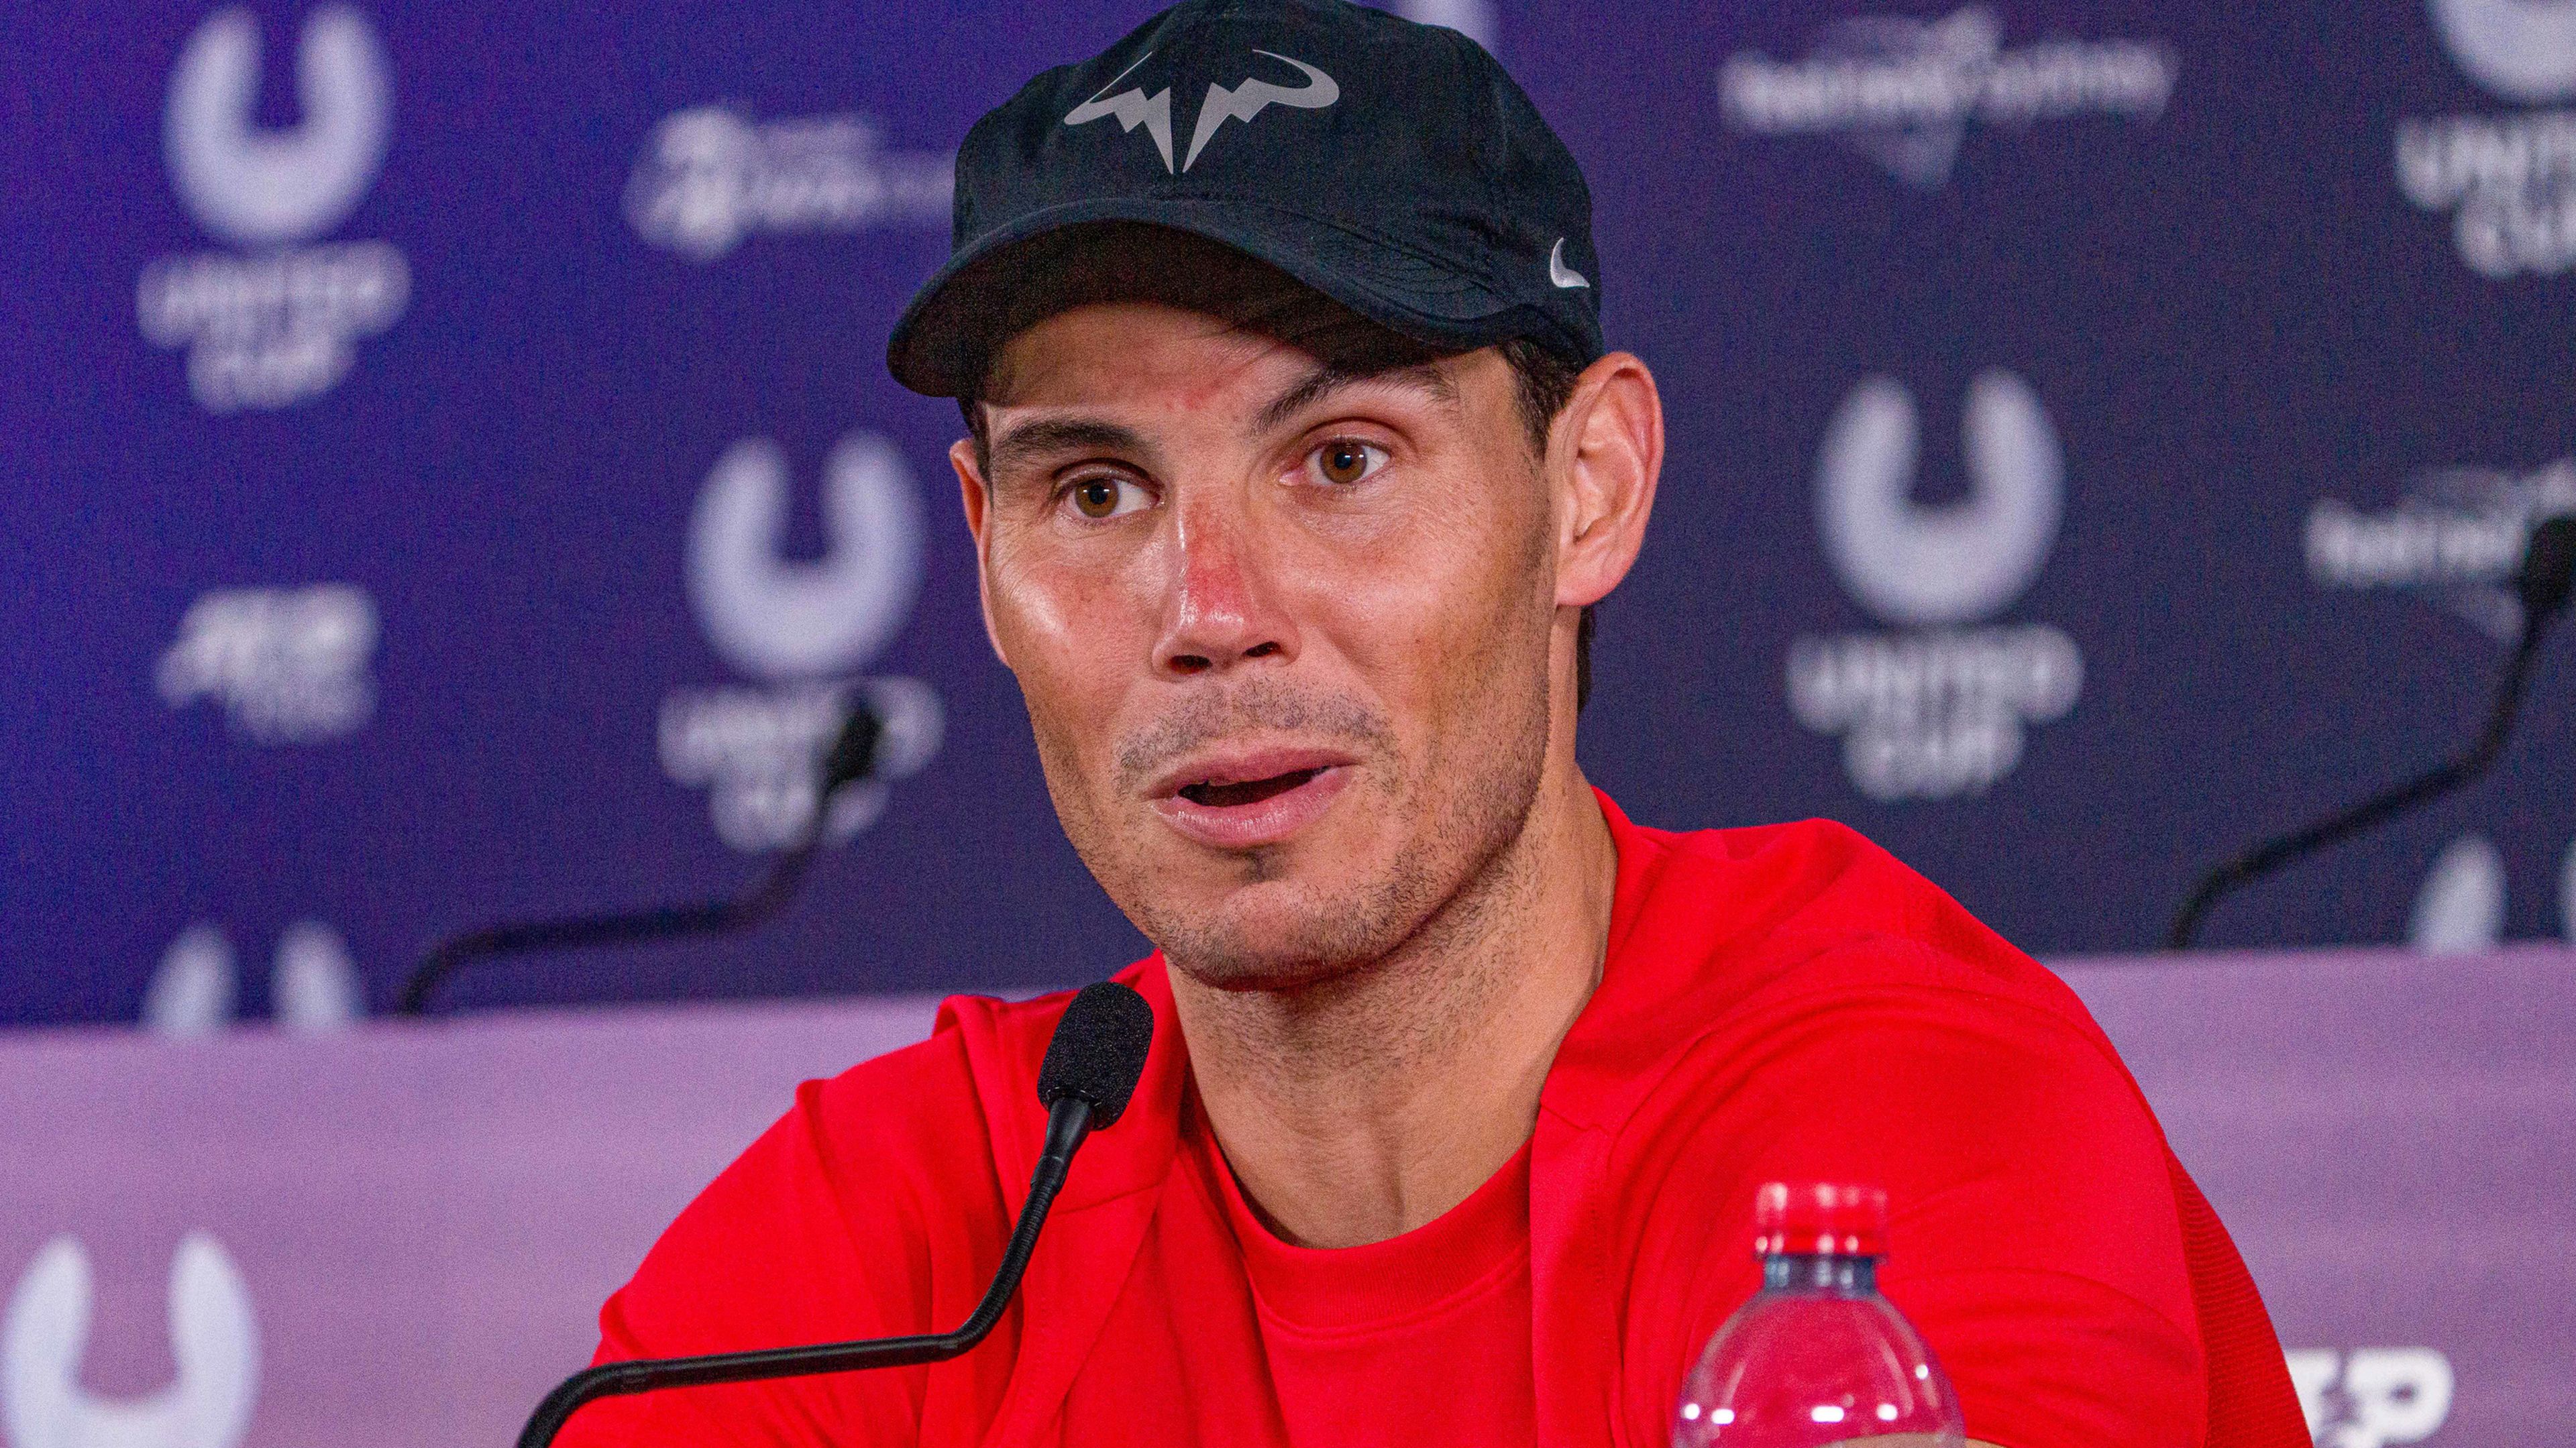 Rafael Nadal gives a media interview after losing his Group D singles match against Alex De Minaur.